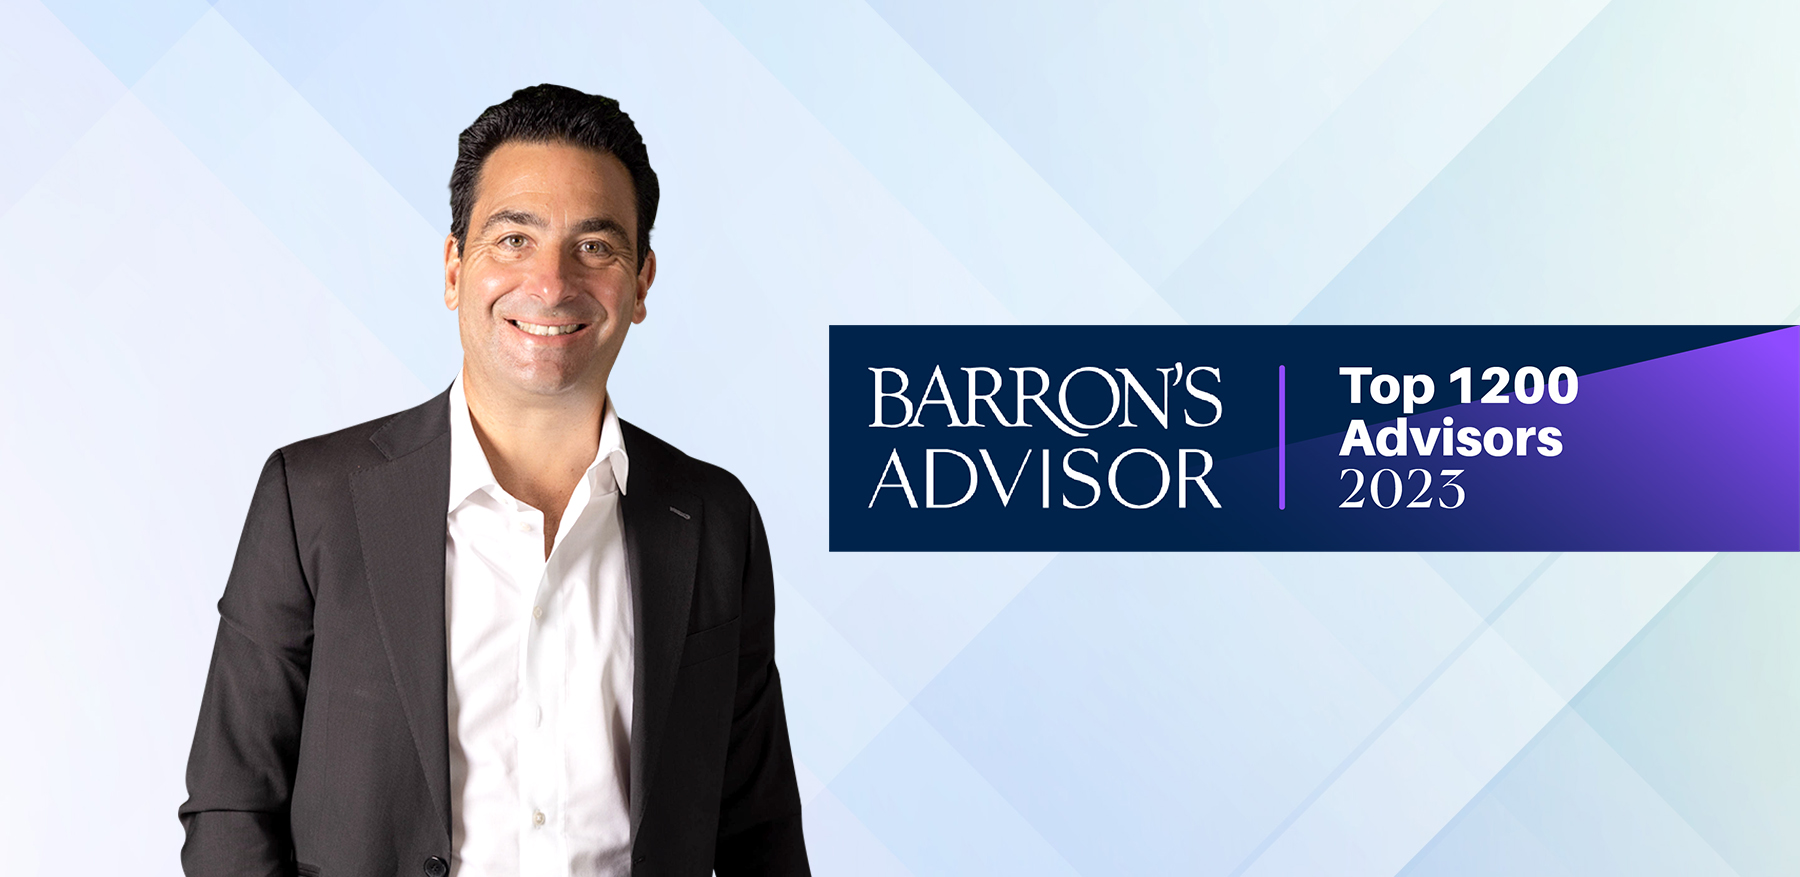 GMAG Named to Barron’s Top 1200 Financial Advisors for 2023